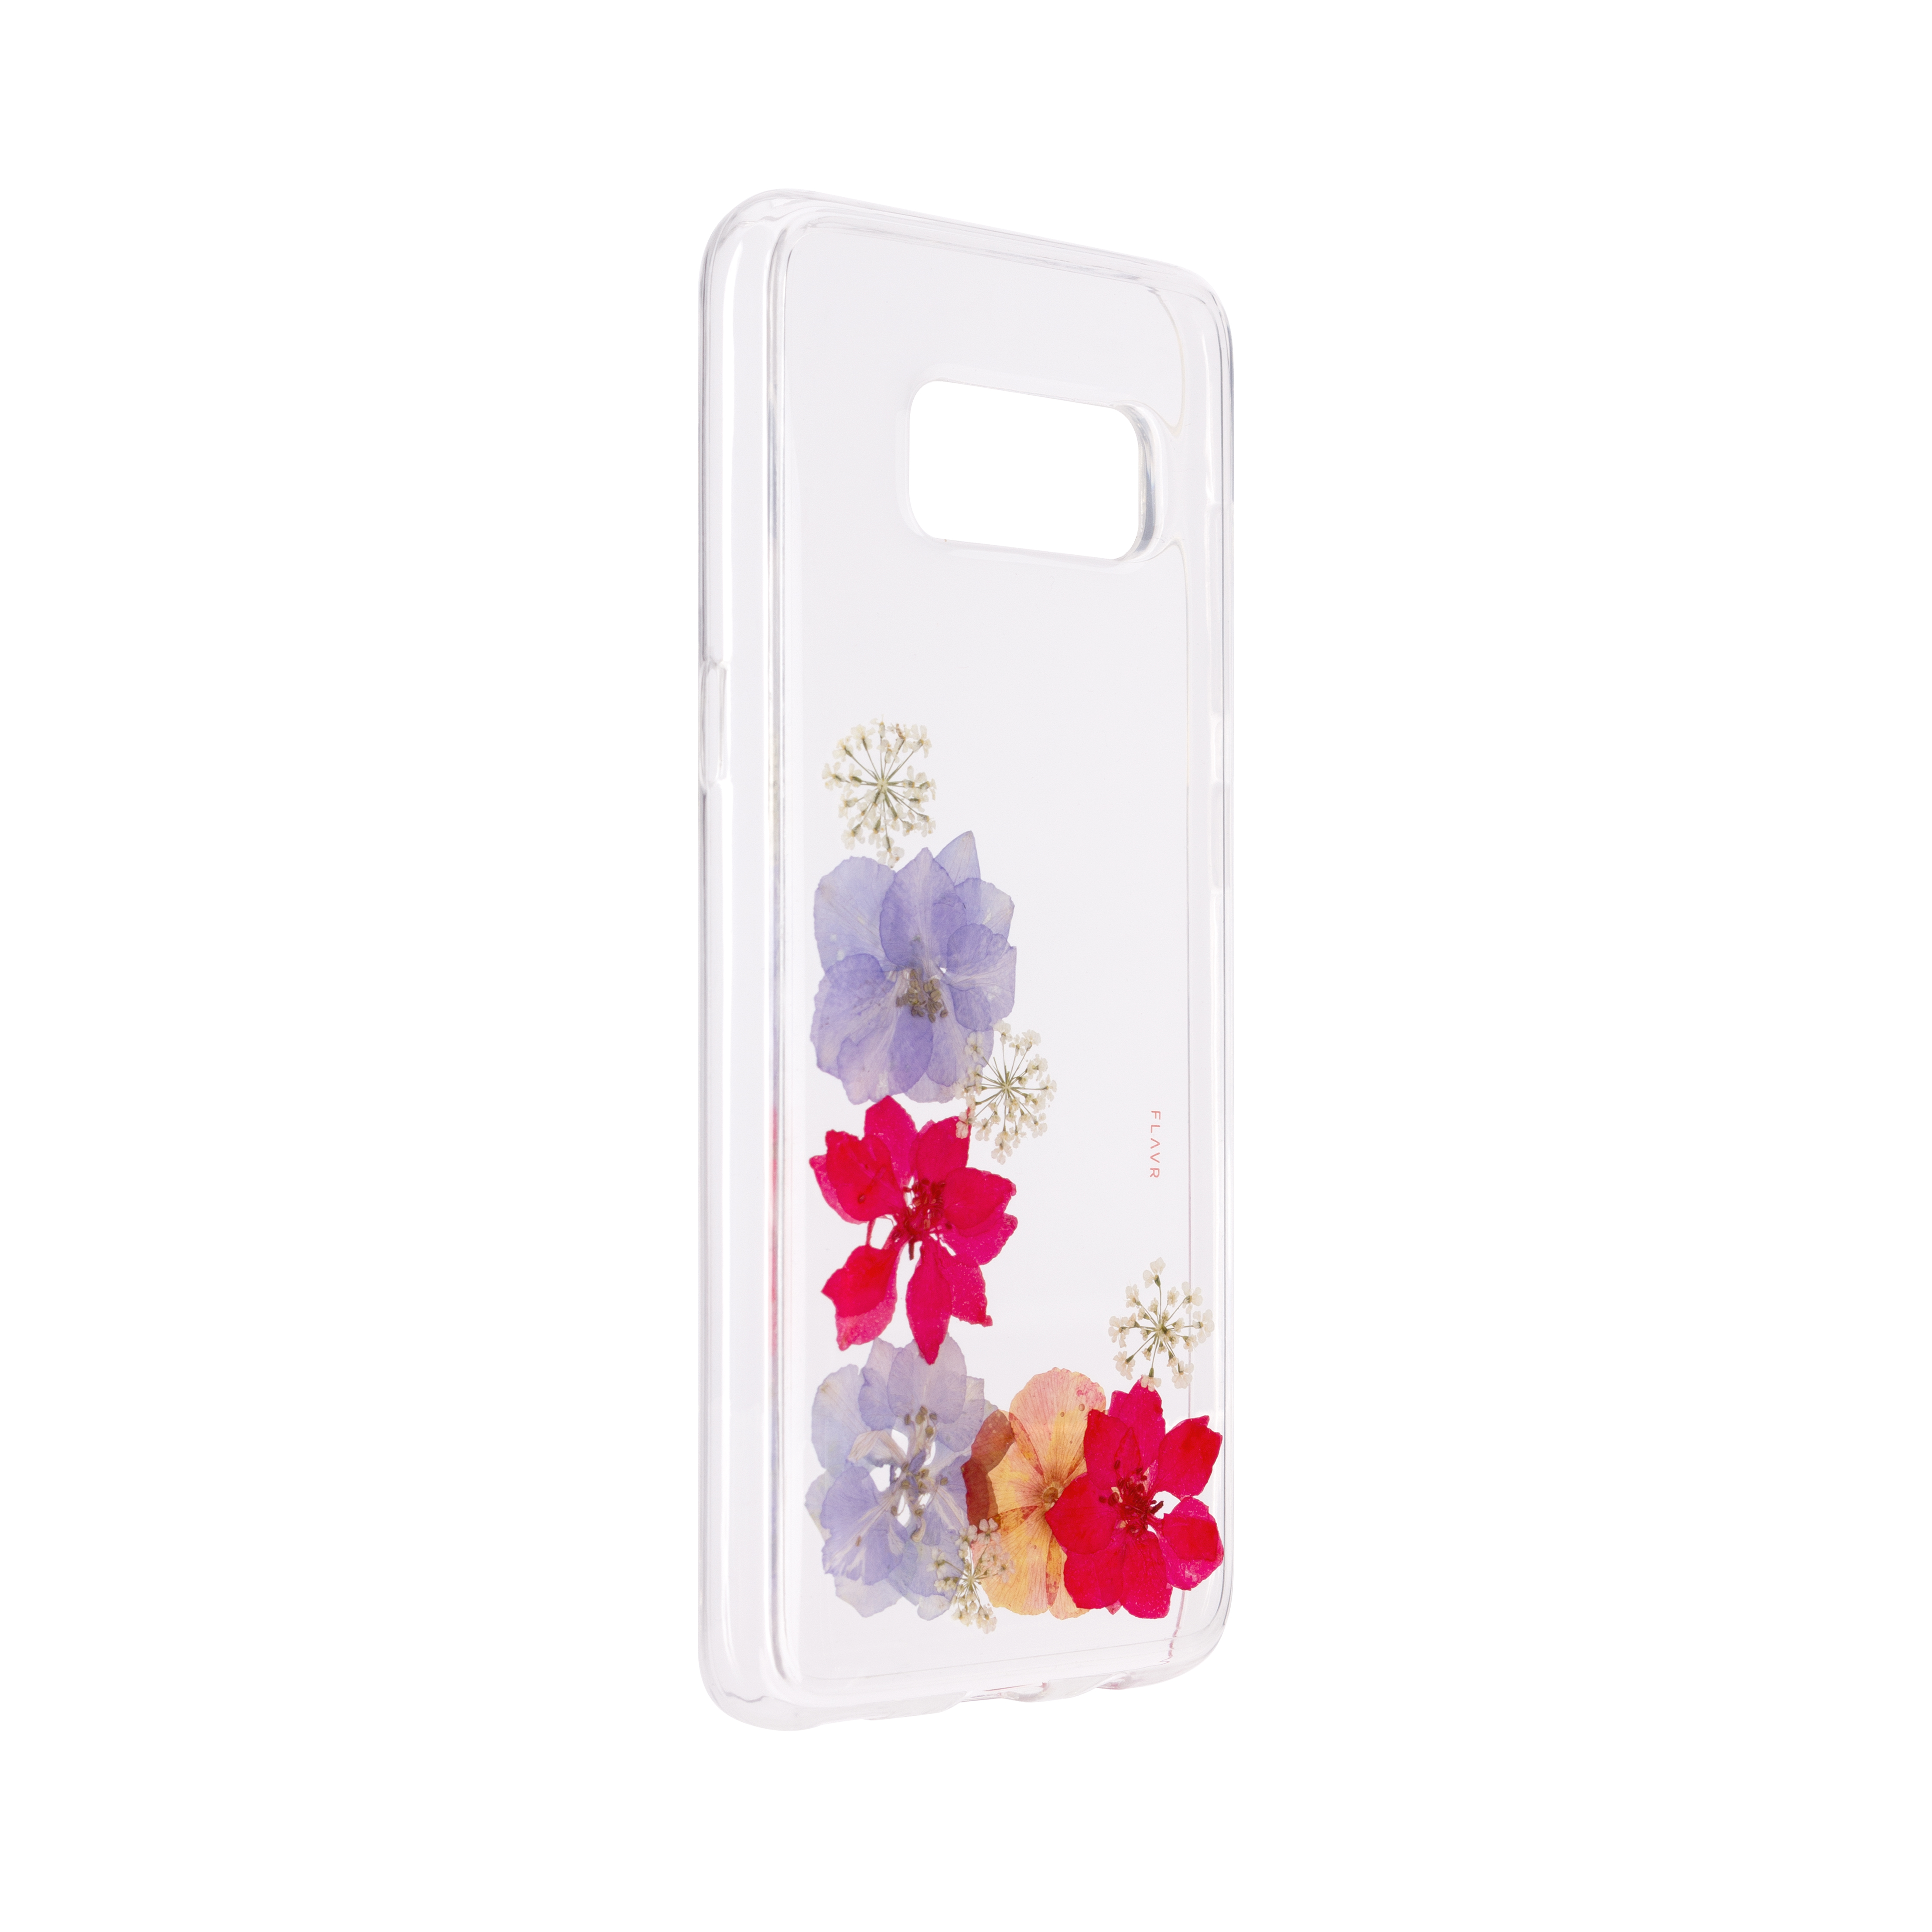 FLAVR iPlate GALAXY Amelia, Backcover, S8, COLOURFUL Real SAMSUNG, Flower